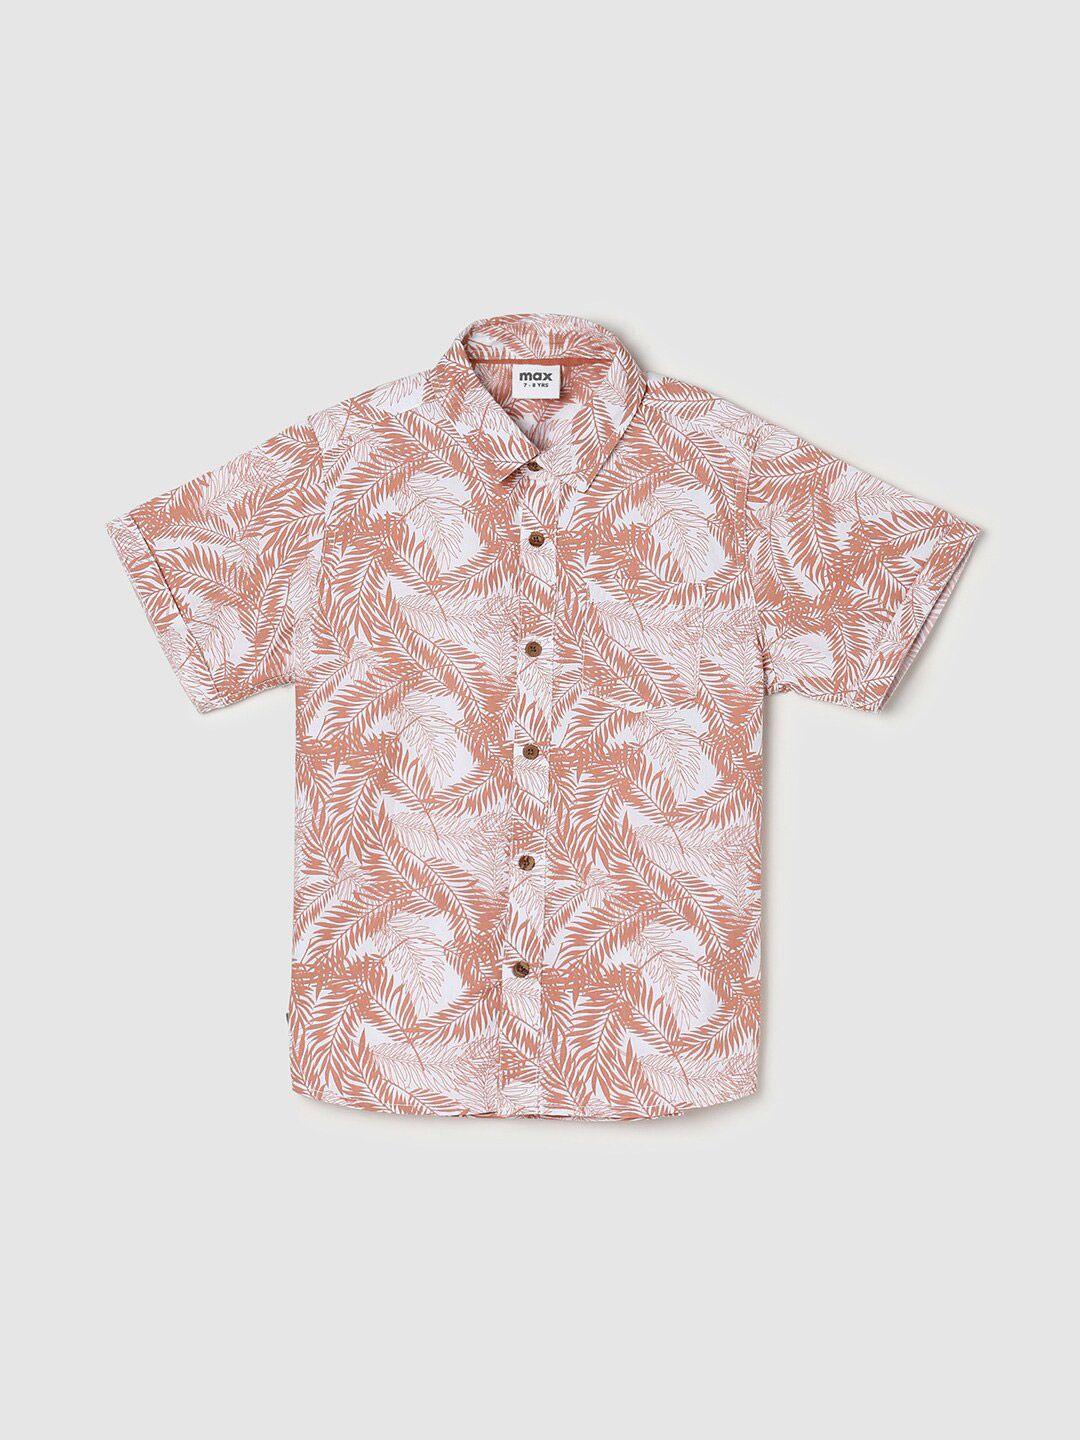 max-boys-floral-printed-pure-cotton-casual-shirt